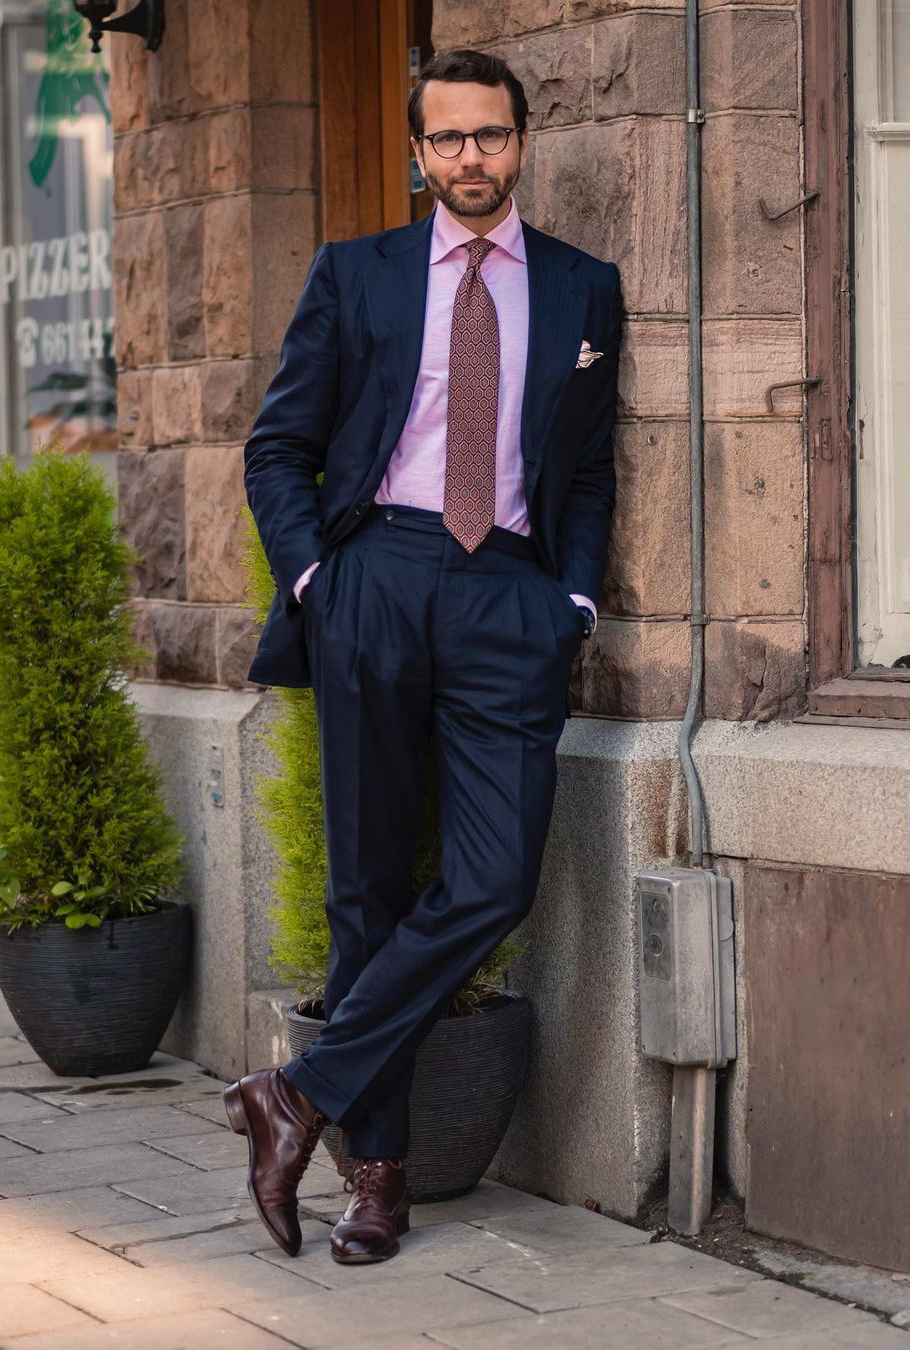 navy suit, pink shirt, and red paisley tie color combination